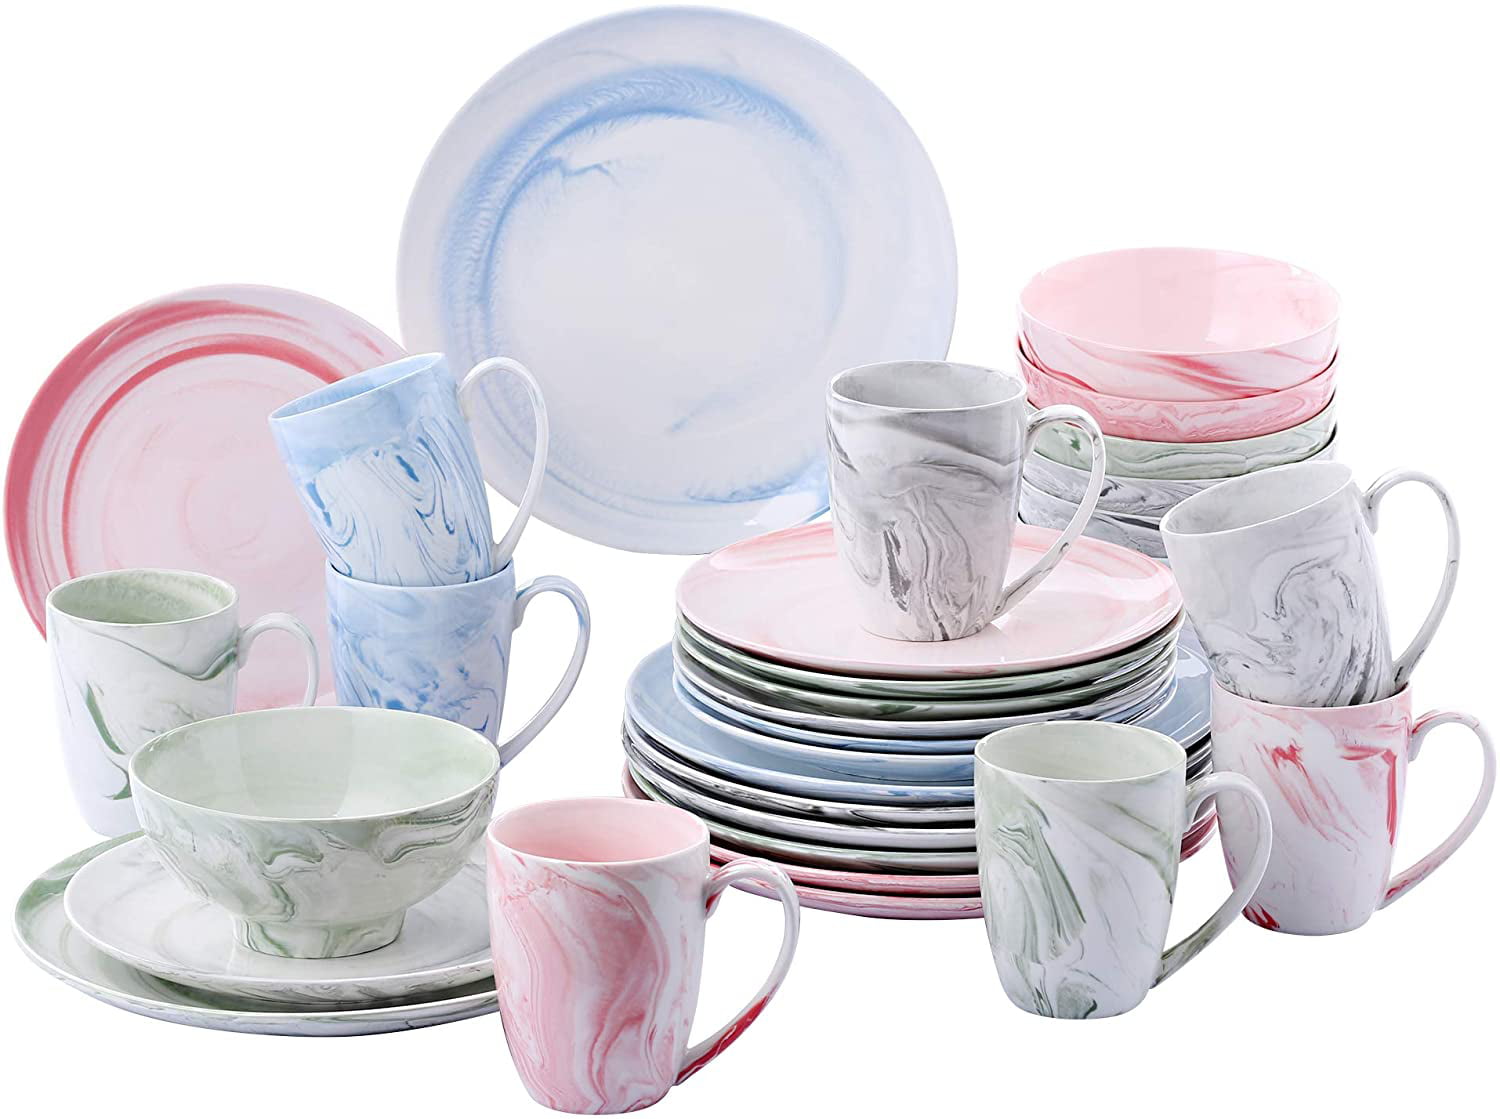 32-Piece of Porcelain Combination Set with Dinner Plate Series Clara Blue Vancasso Cereal Bowl and Cup Service for 8 Dessert Plate